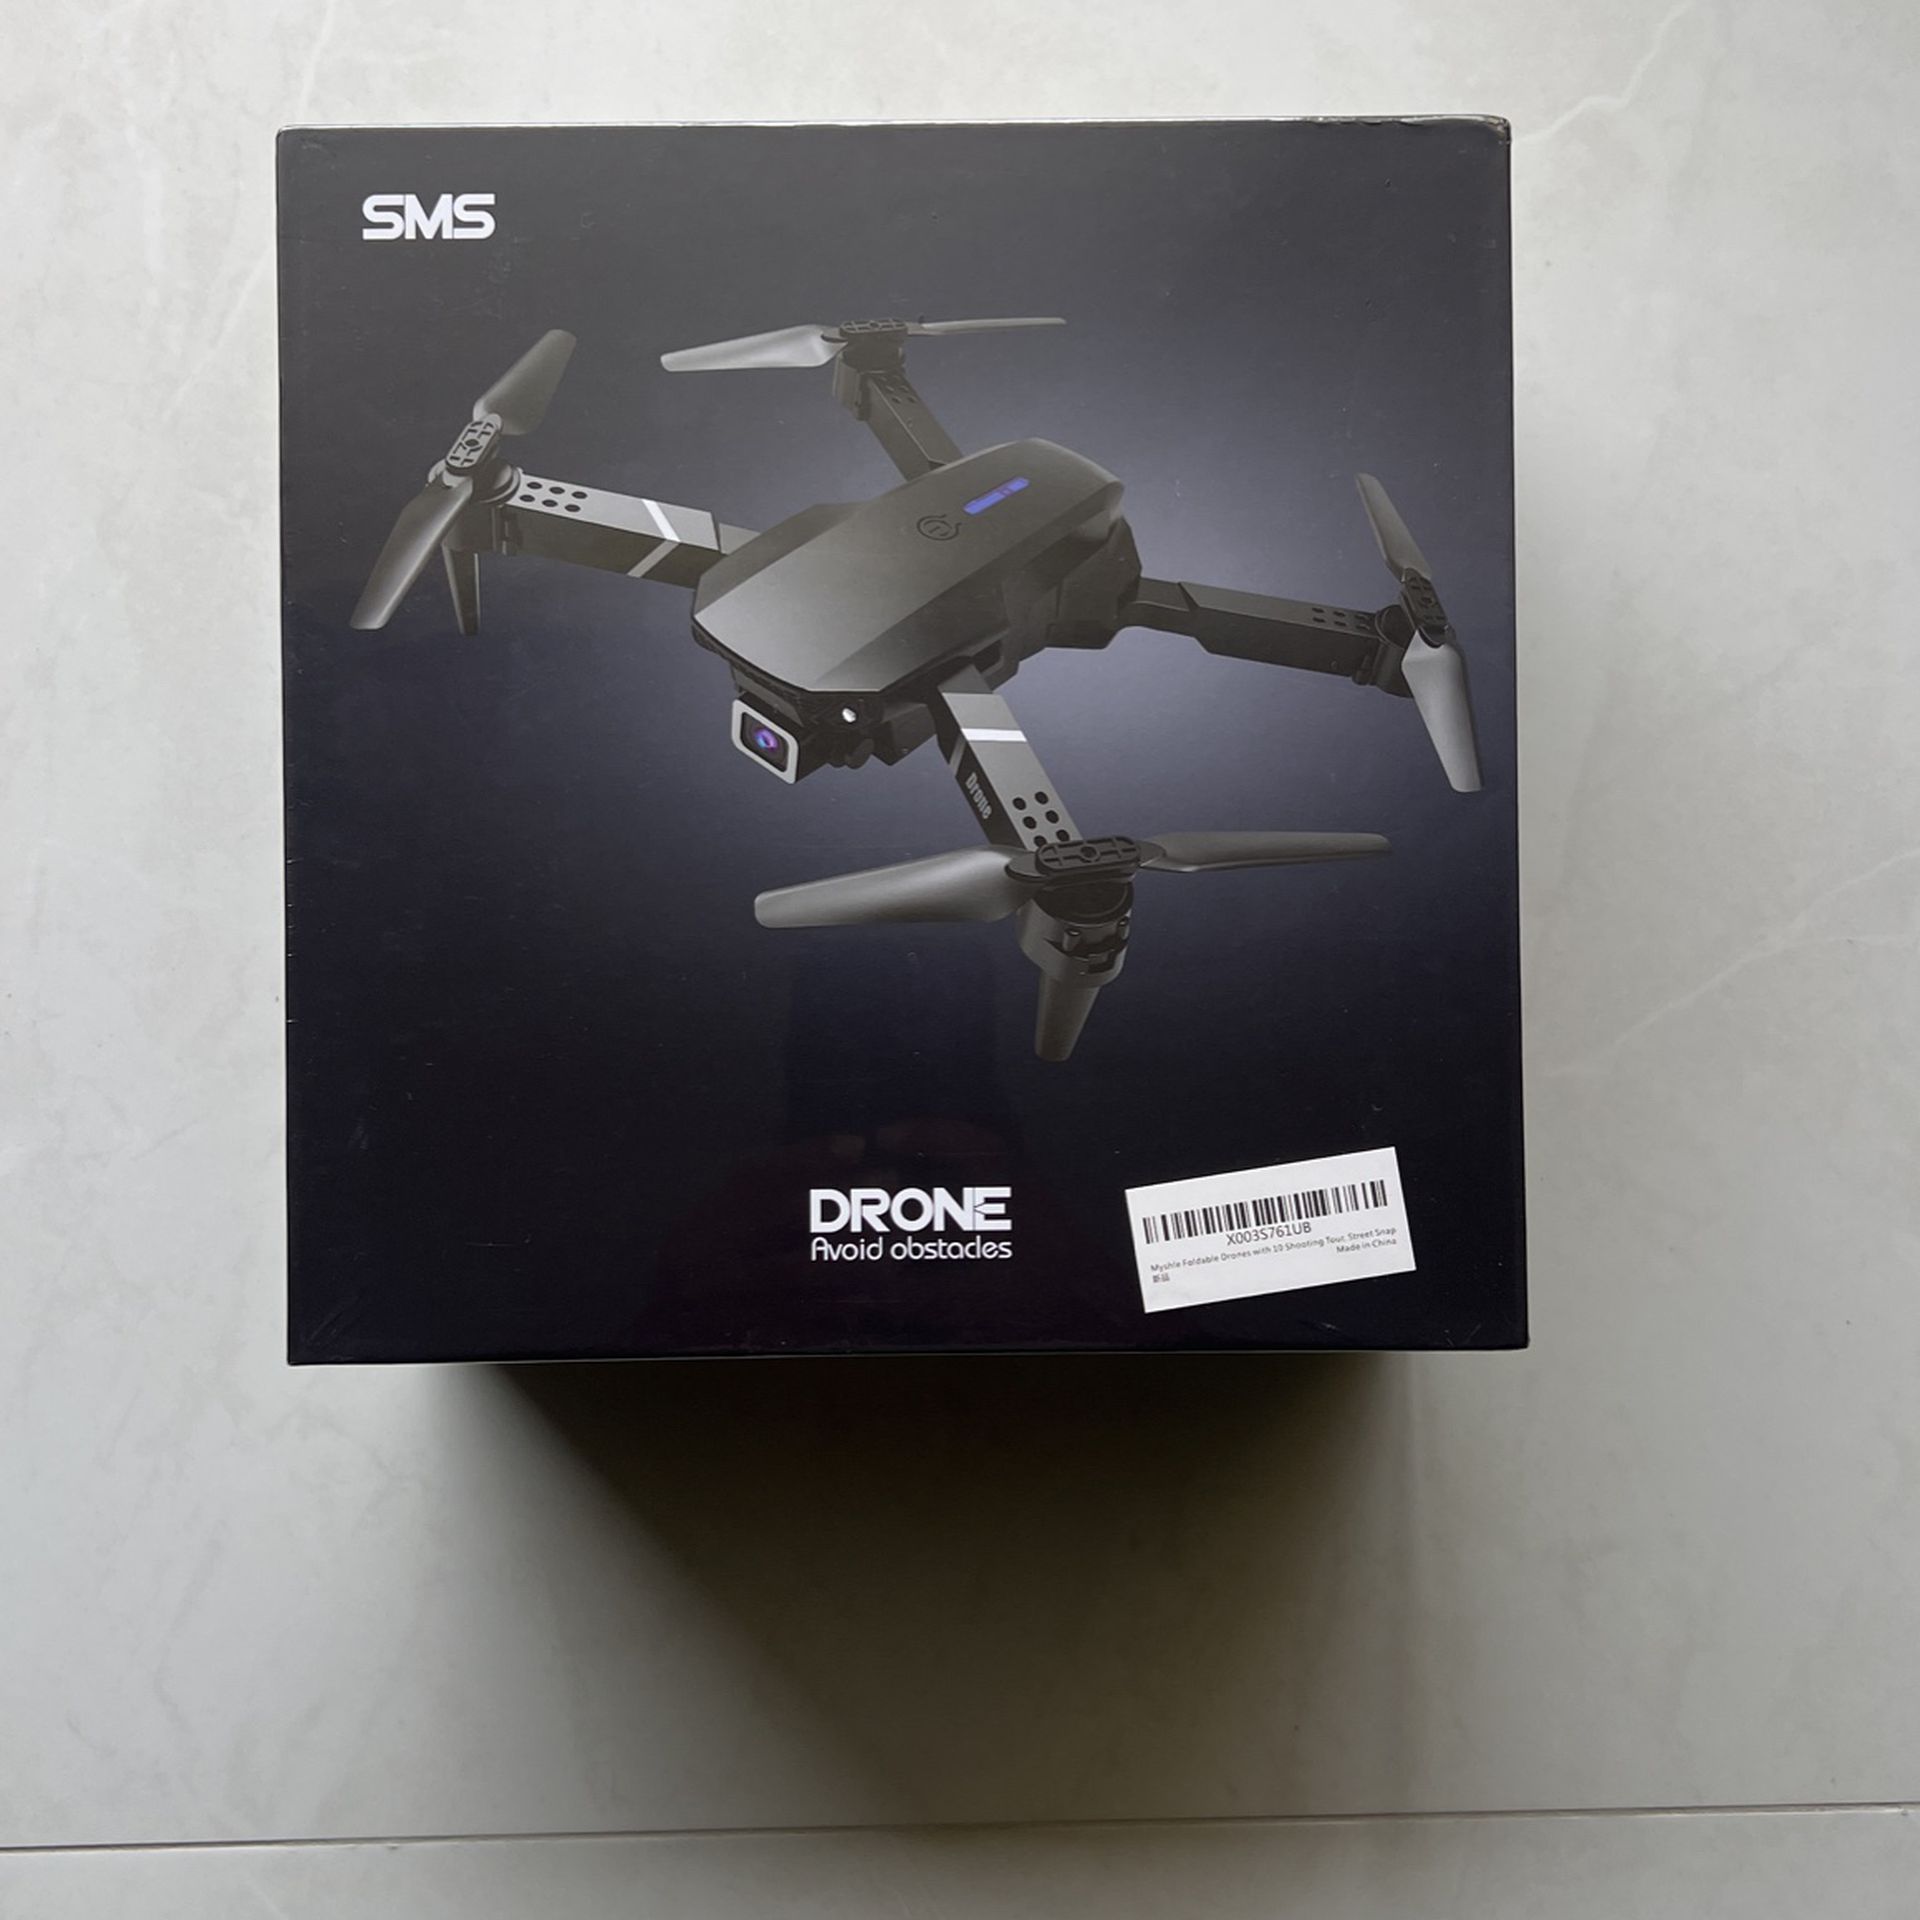 DRONE ! SMS avoids obstacles drone 4k camera, photo and video BRAND NEW un opened